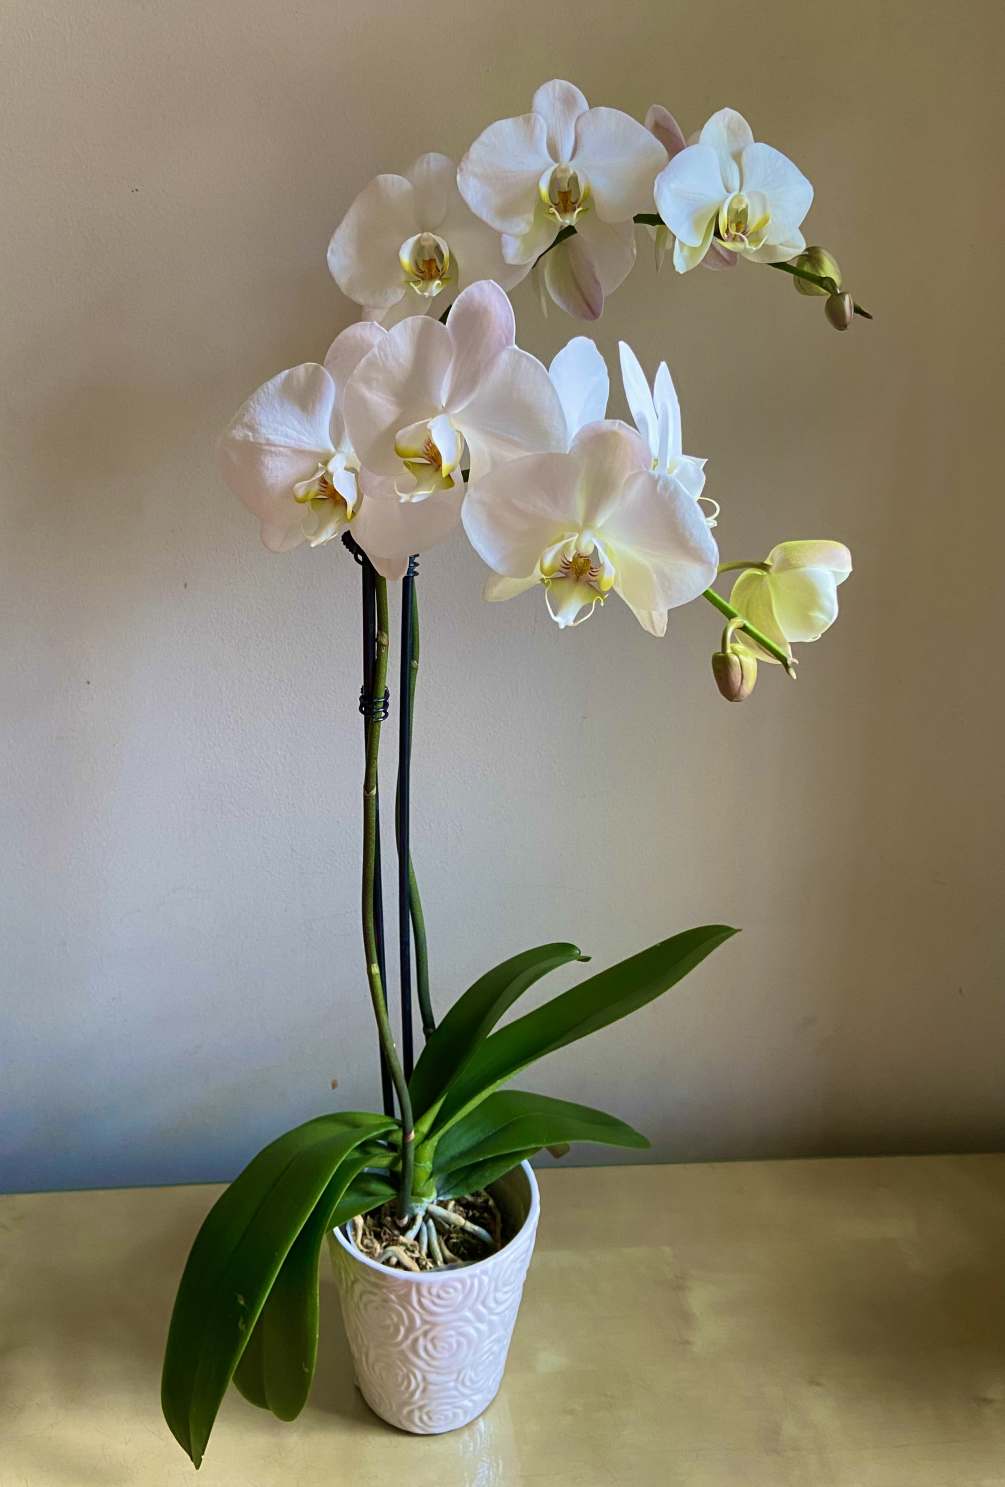 The best gift for any occasion. Stately white phalaenopsis orchid plant looks